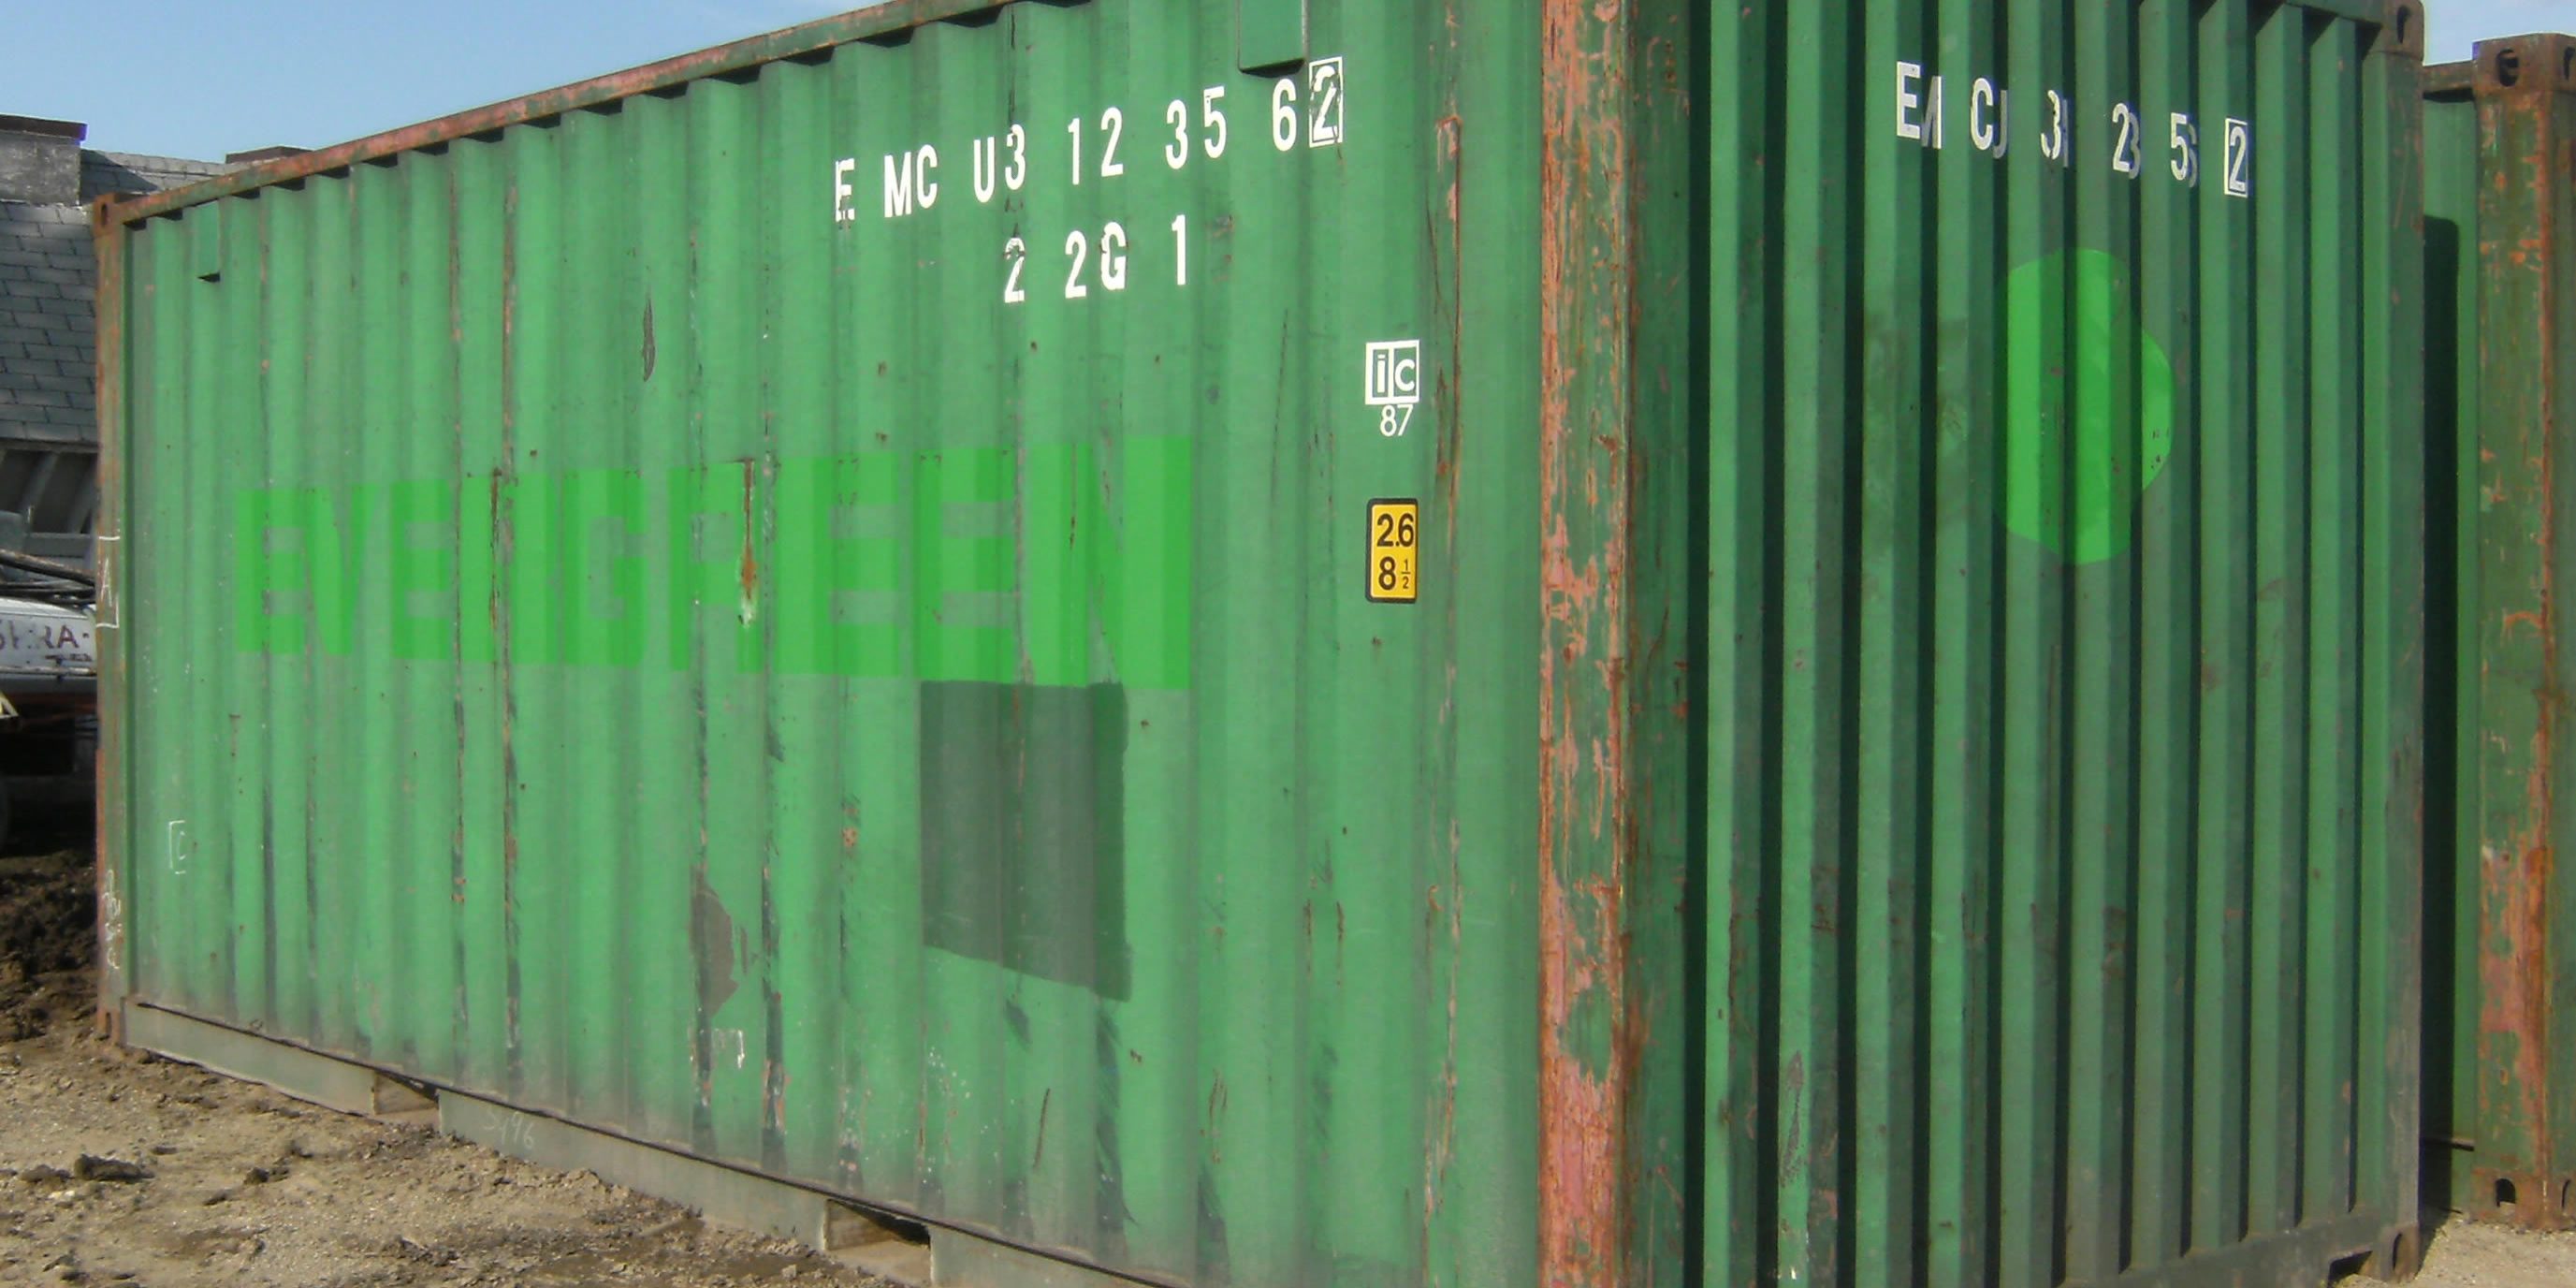 container1